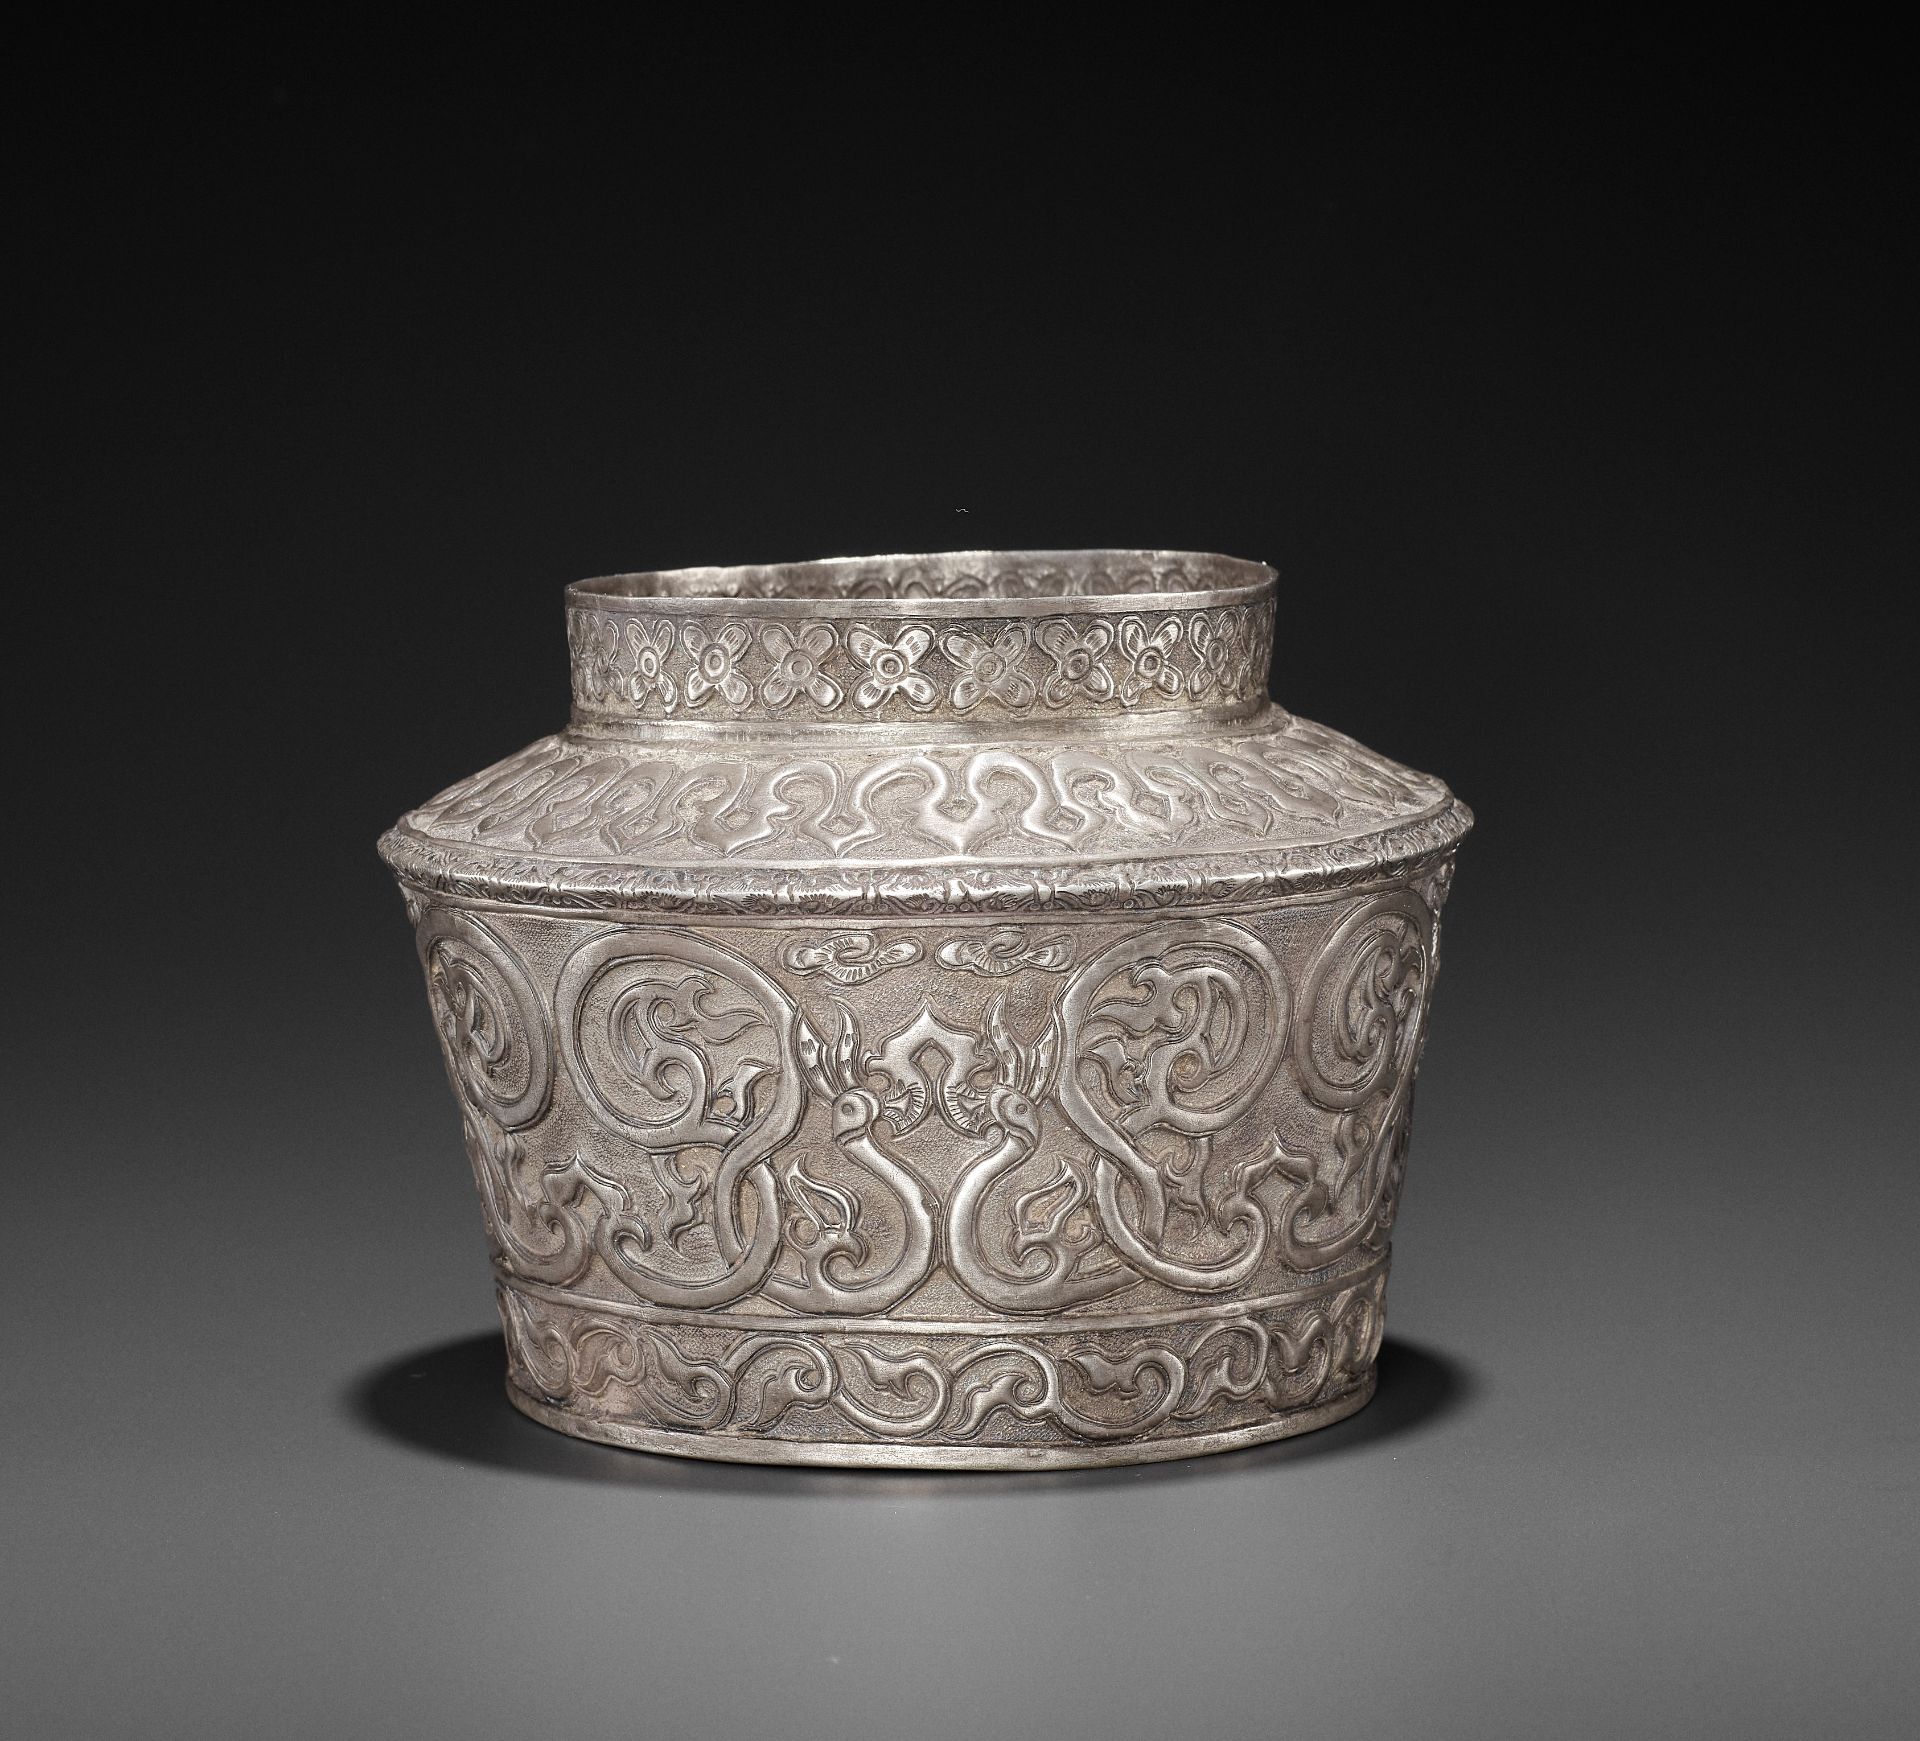 AN EXTREMELY RARE AND FINE CHAM SILVER REPOUSSE BOWL WITH PHOENIXES